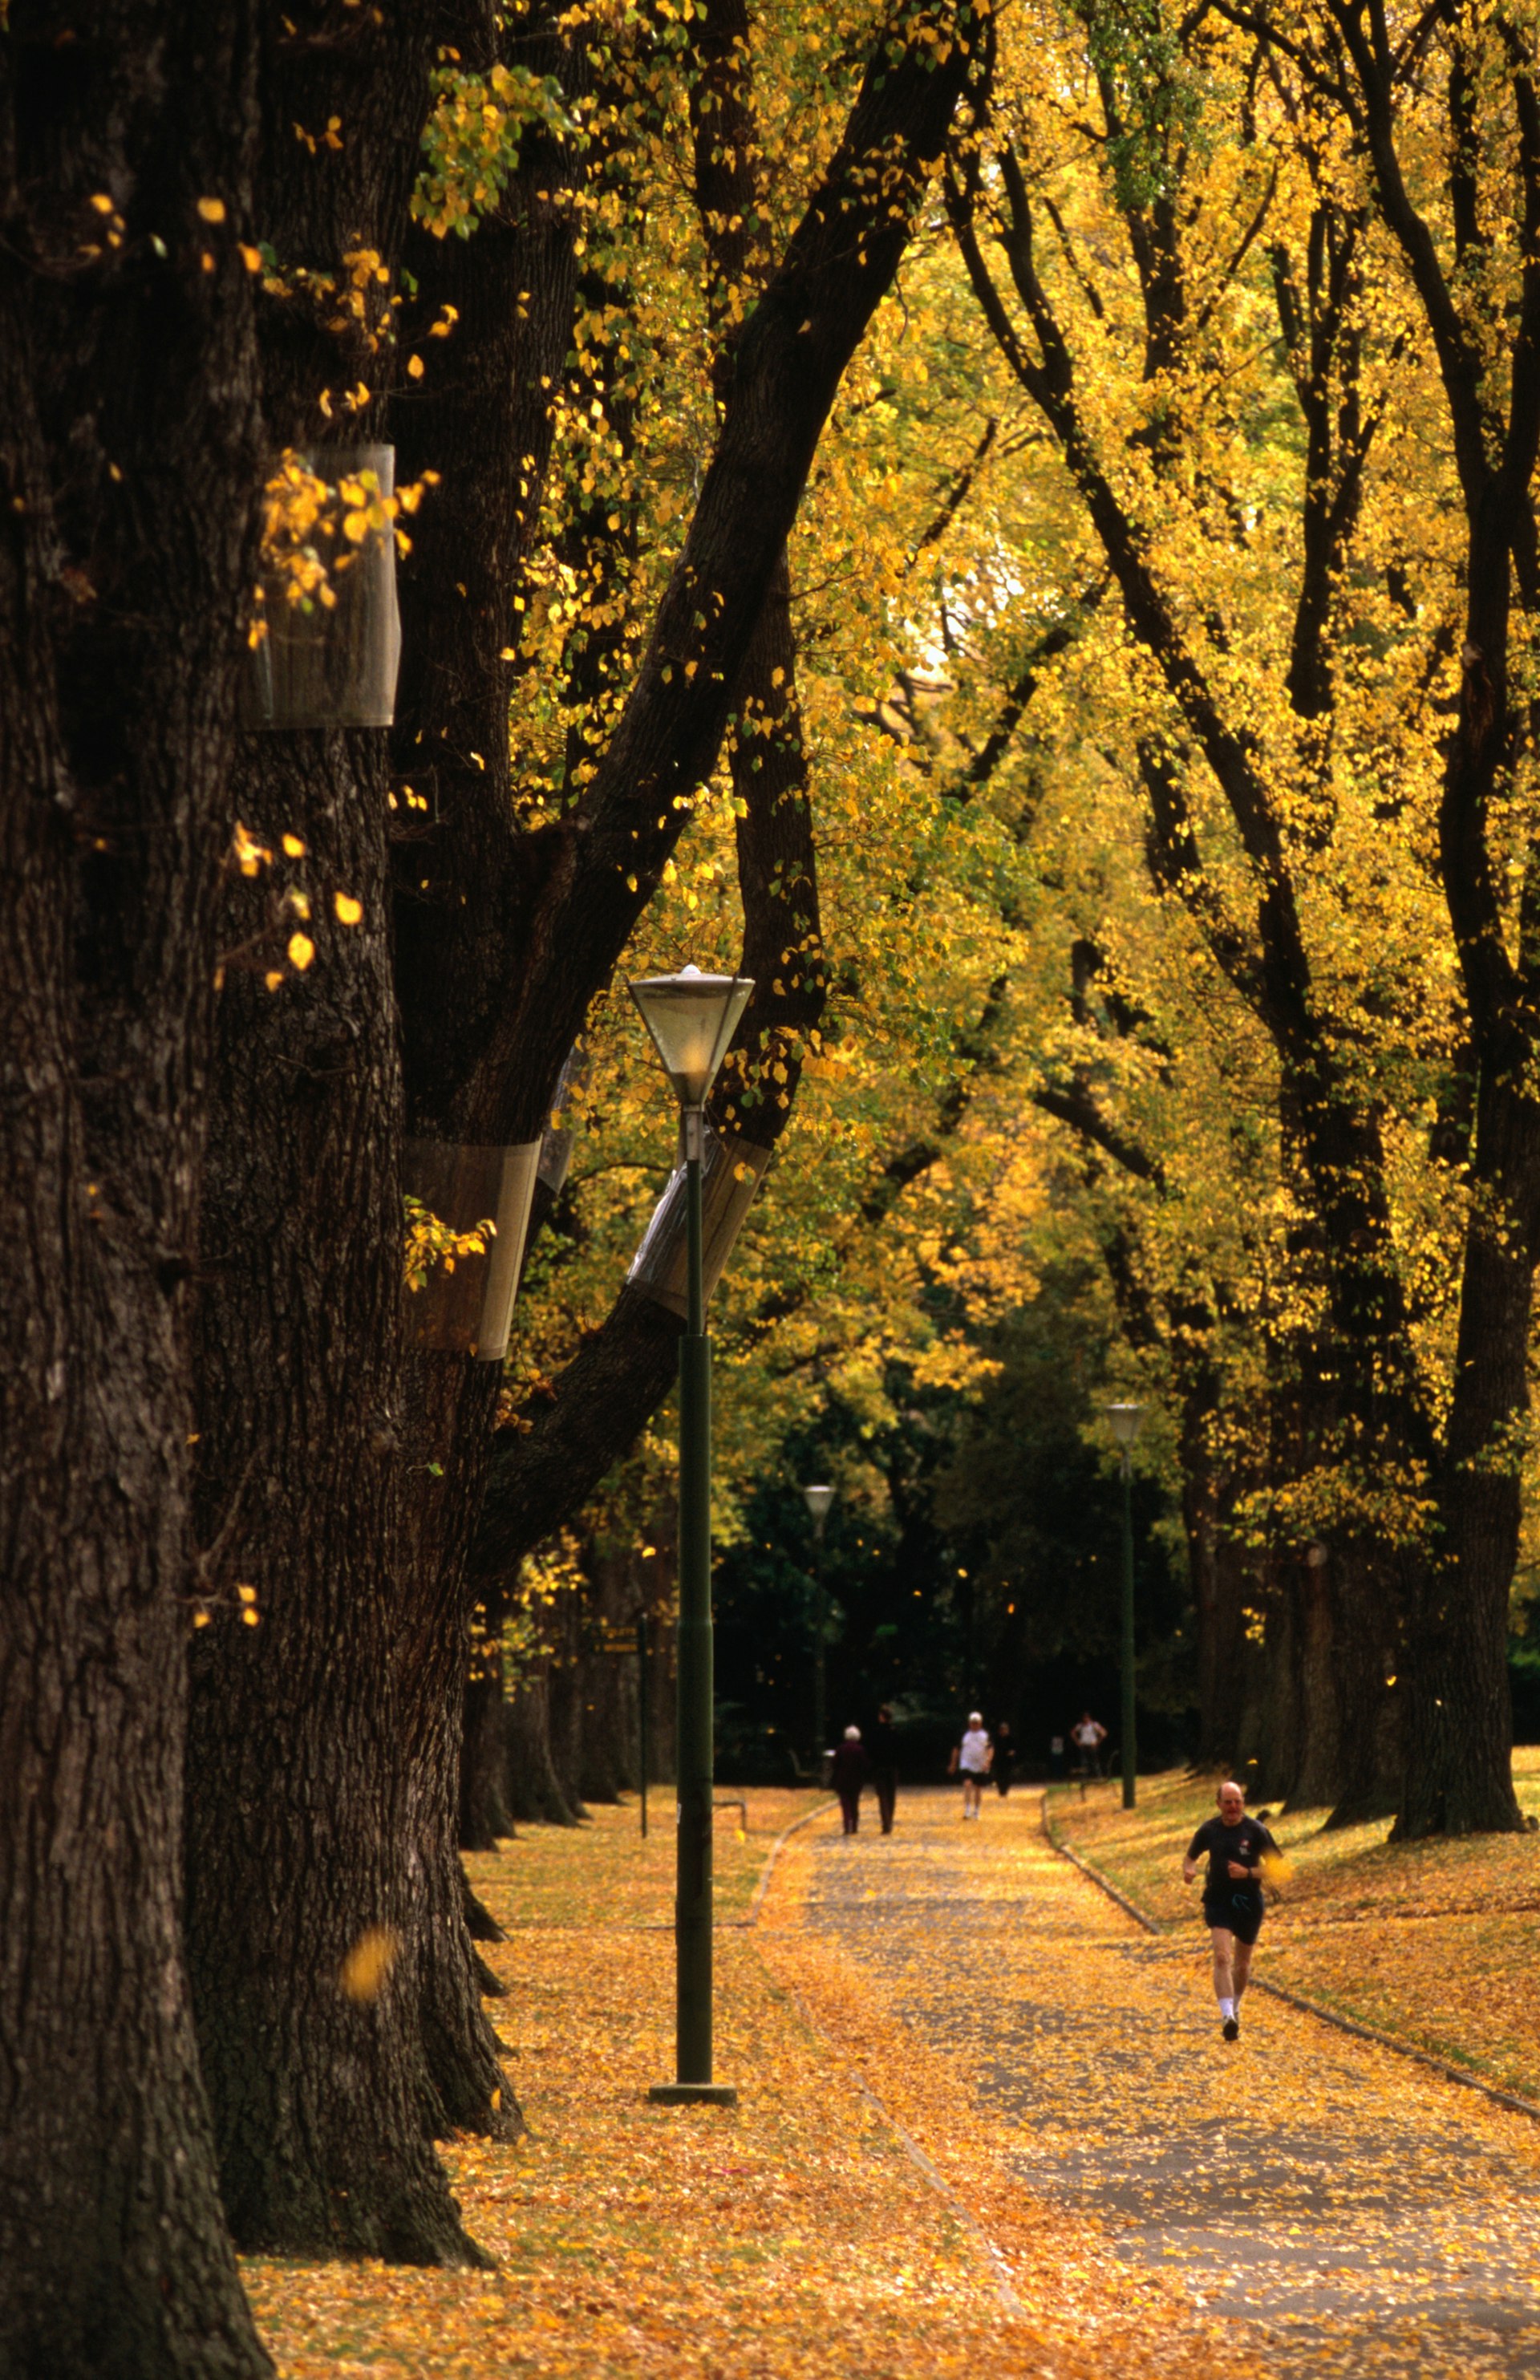 A jogger runs along a paved pathway through an autumnal Fitzroy Park in Melbourne. The leaves of the large trees lining the path are gold and orange in colour.